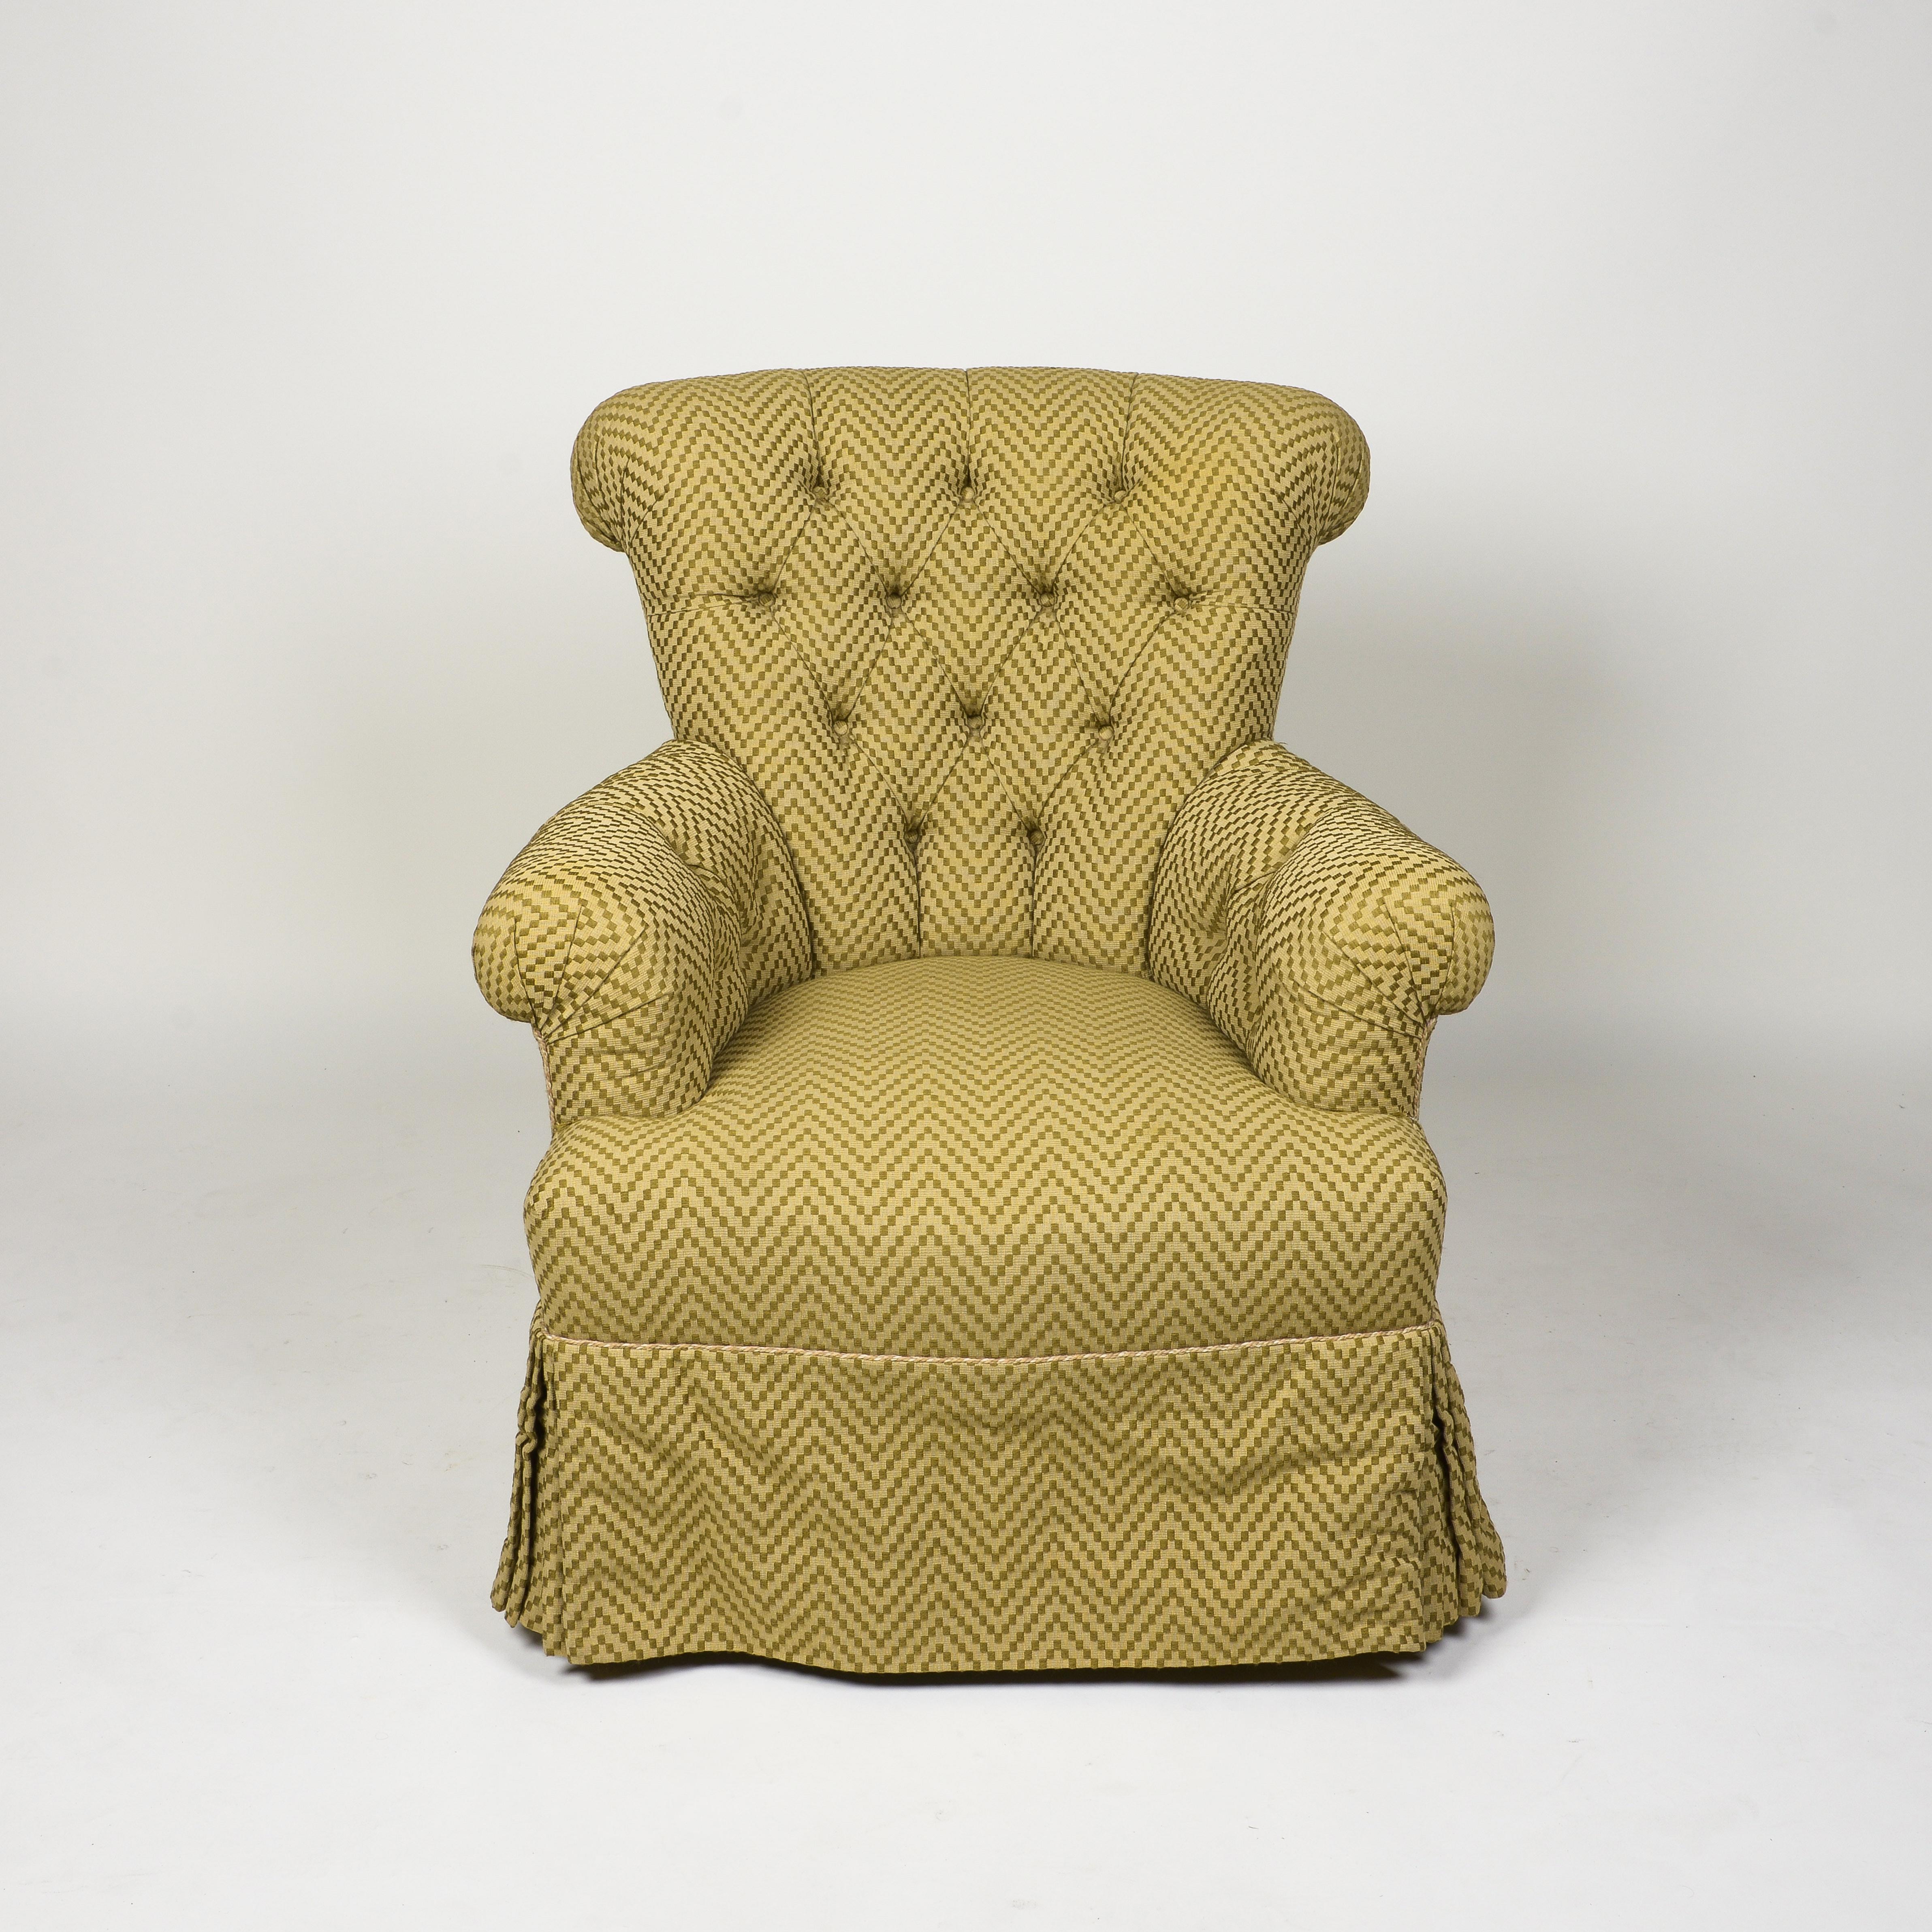 The back with outward scrolling crest, issuing low outward scrolling arms; the serpentine-fronted seat rail over a tailored skirt; upholstered in a two-toned olive green woven chevron pattern.